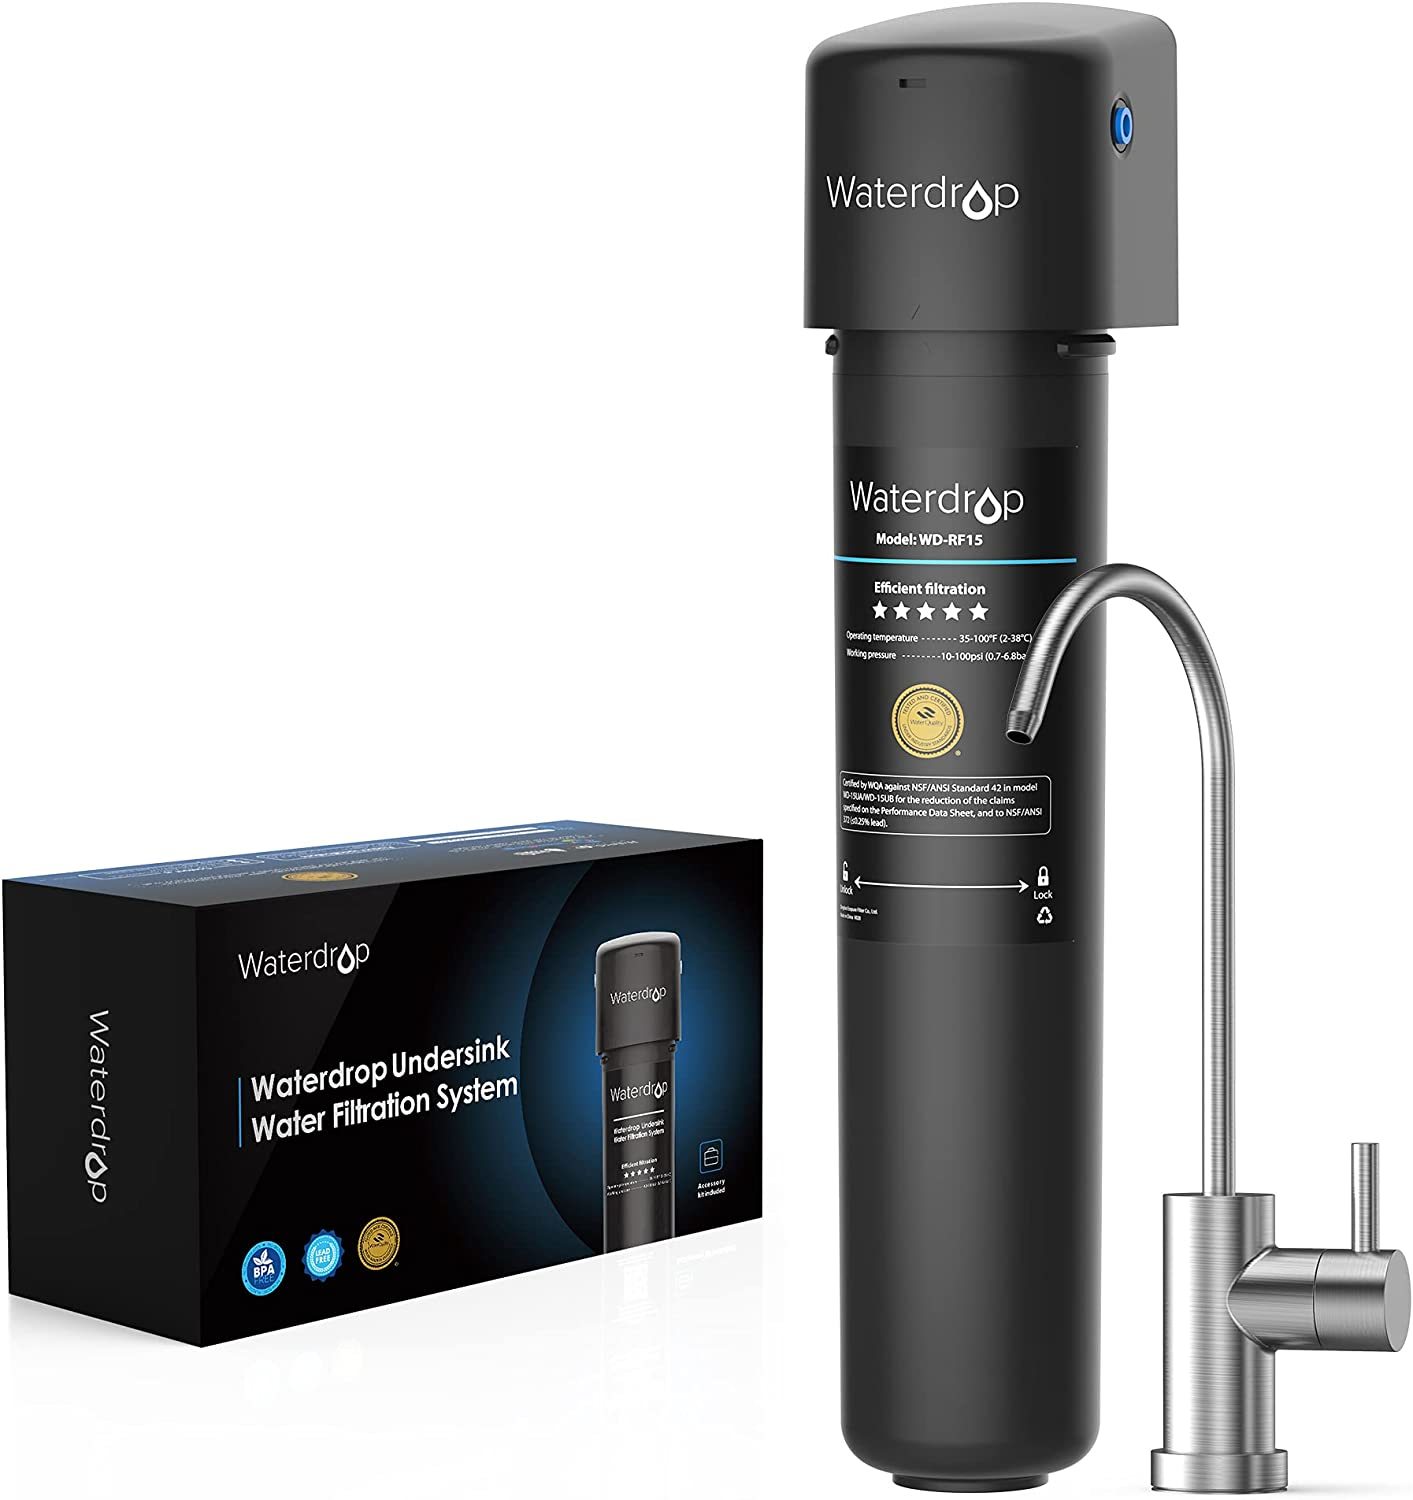 Primary image for Waterdrop 15UB Under Sink Water Filter System, Reduces Lead, Chlorine,, USA Tech